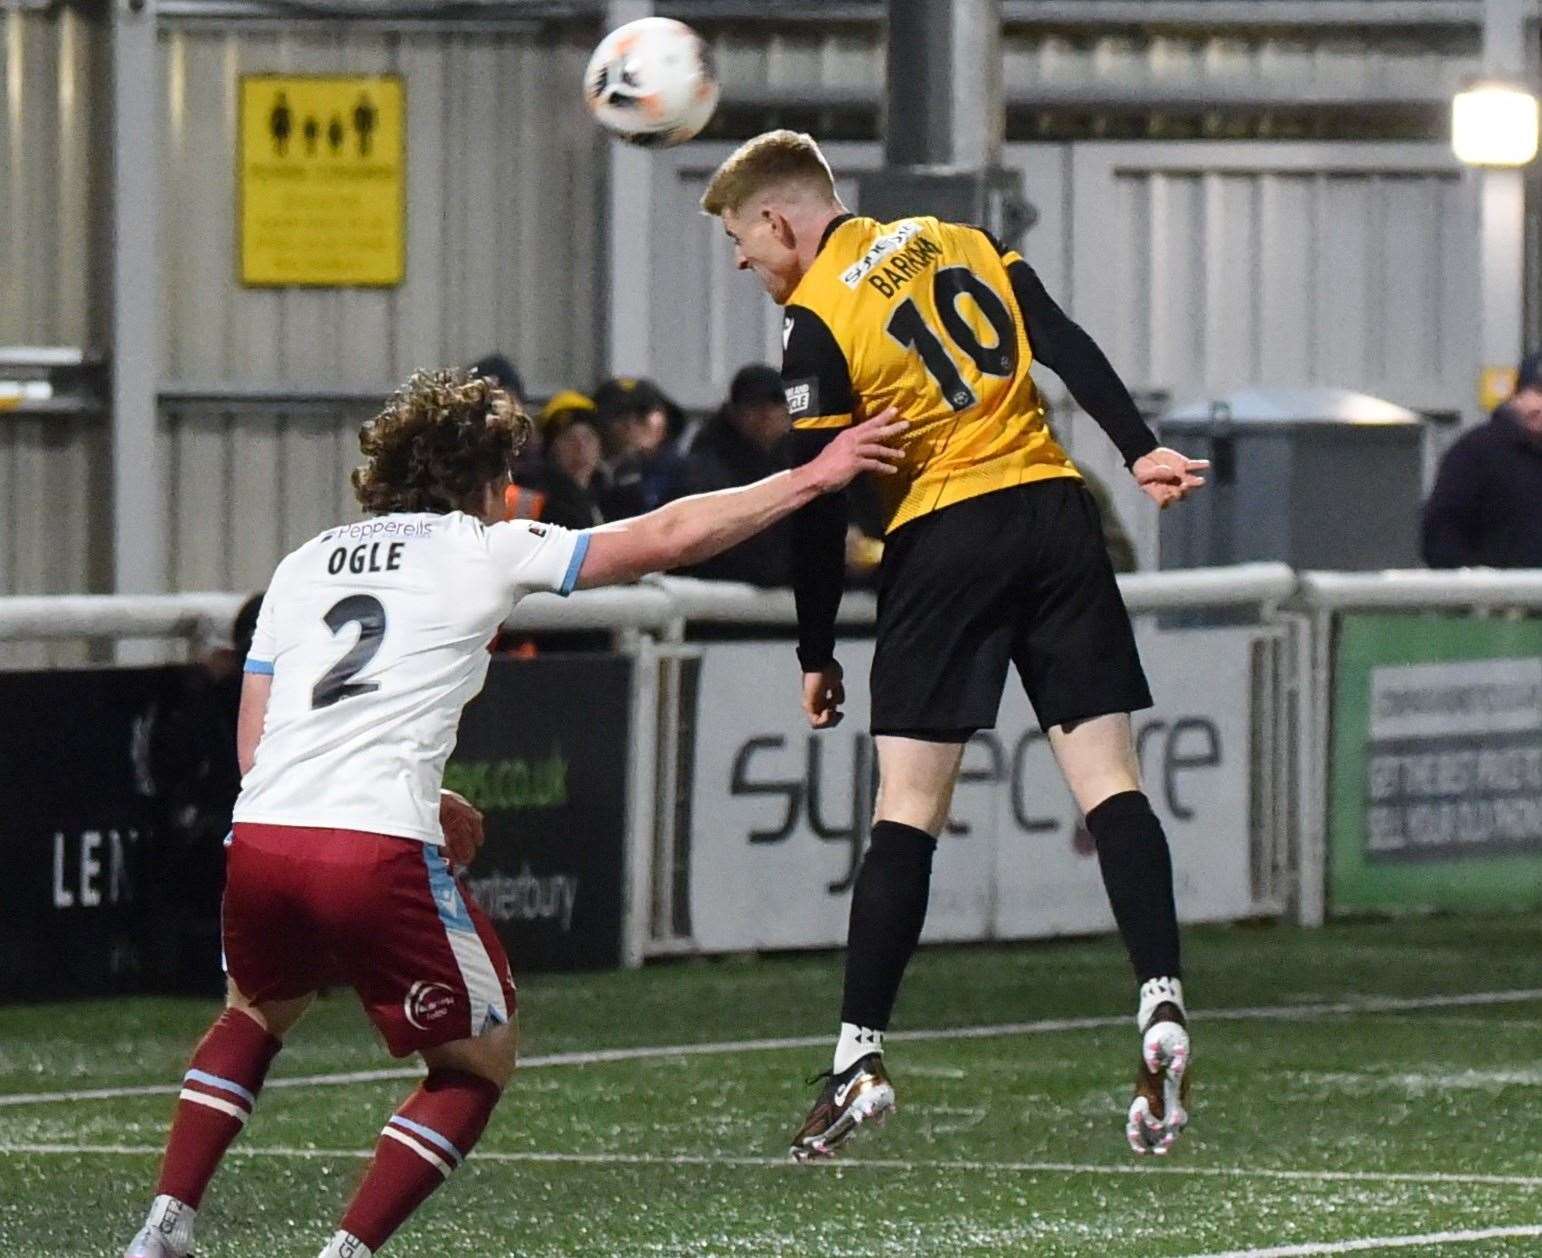 Maidstone striker Jack Barham tries to head for goal ahead of Reagen Ogle in the Stones' 1-1 draw on Tuesday night. Picture: Steve Terrell